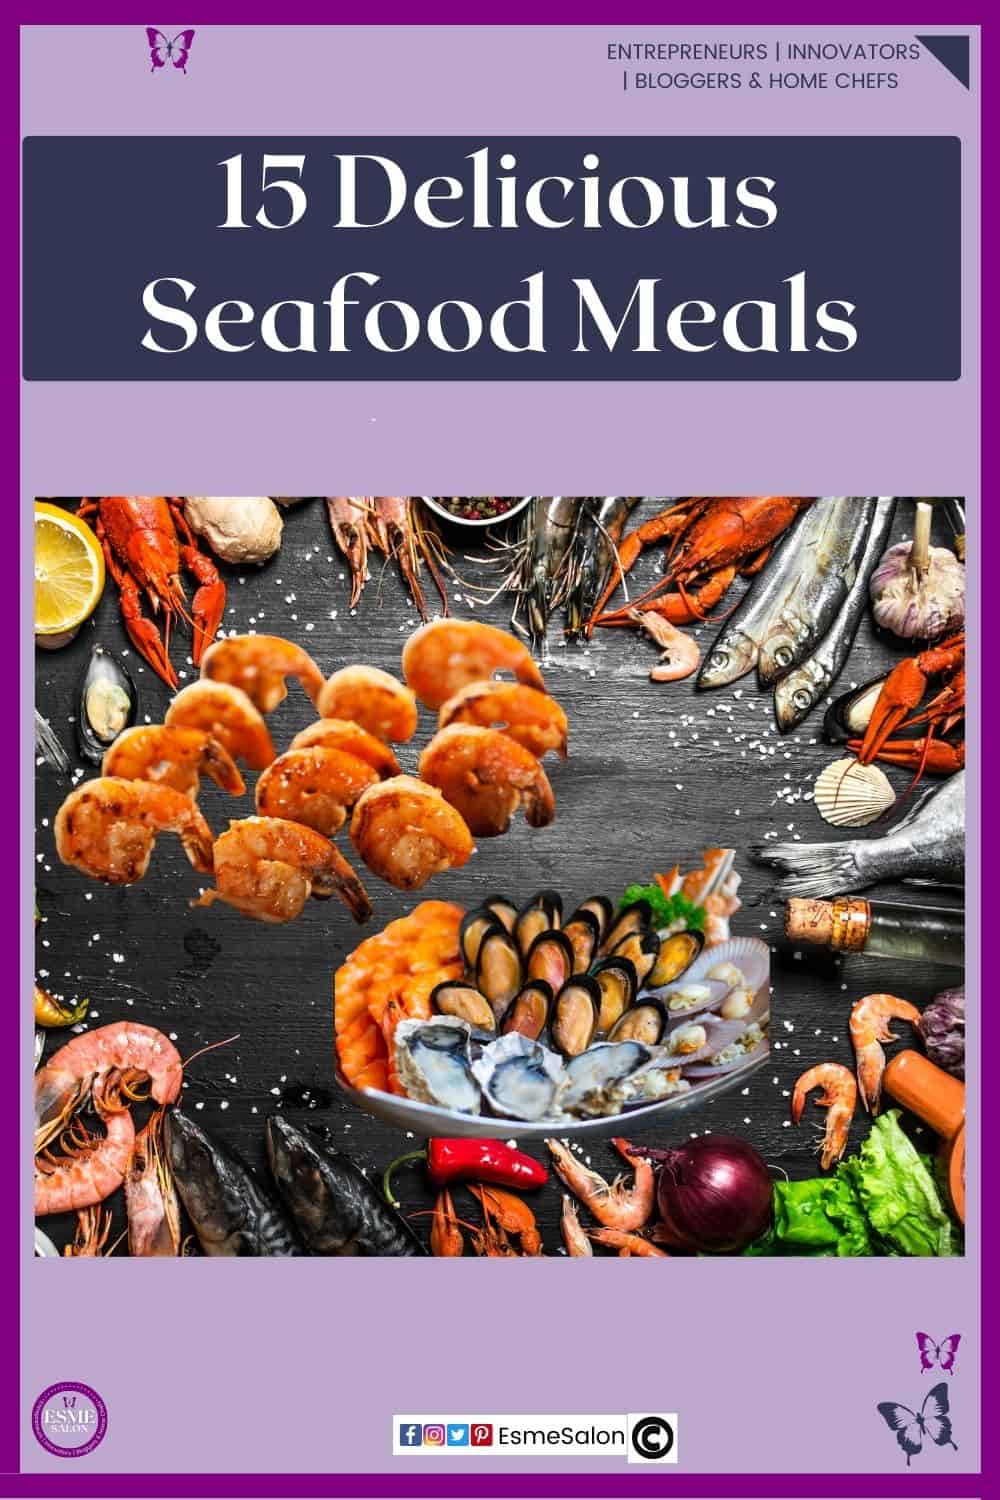 an image of various seafood dishes